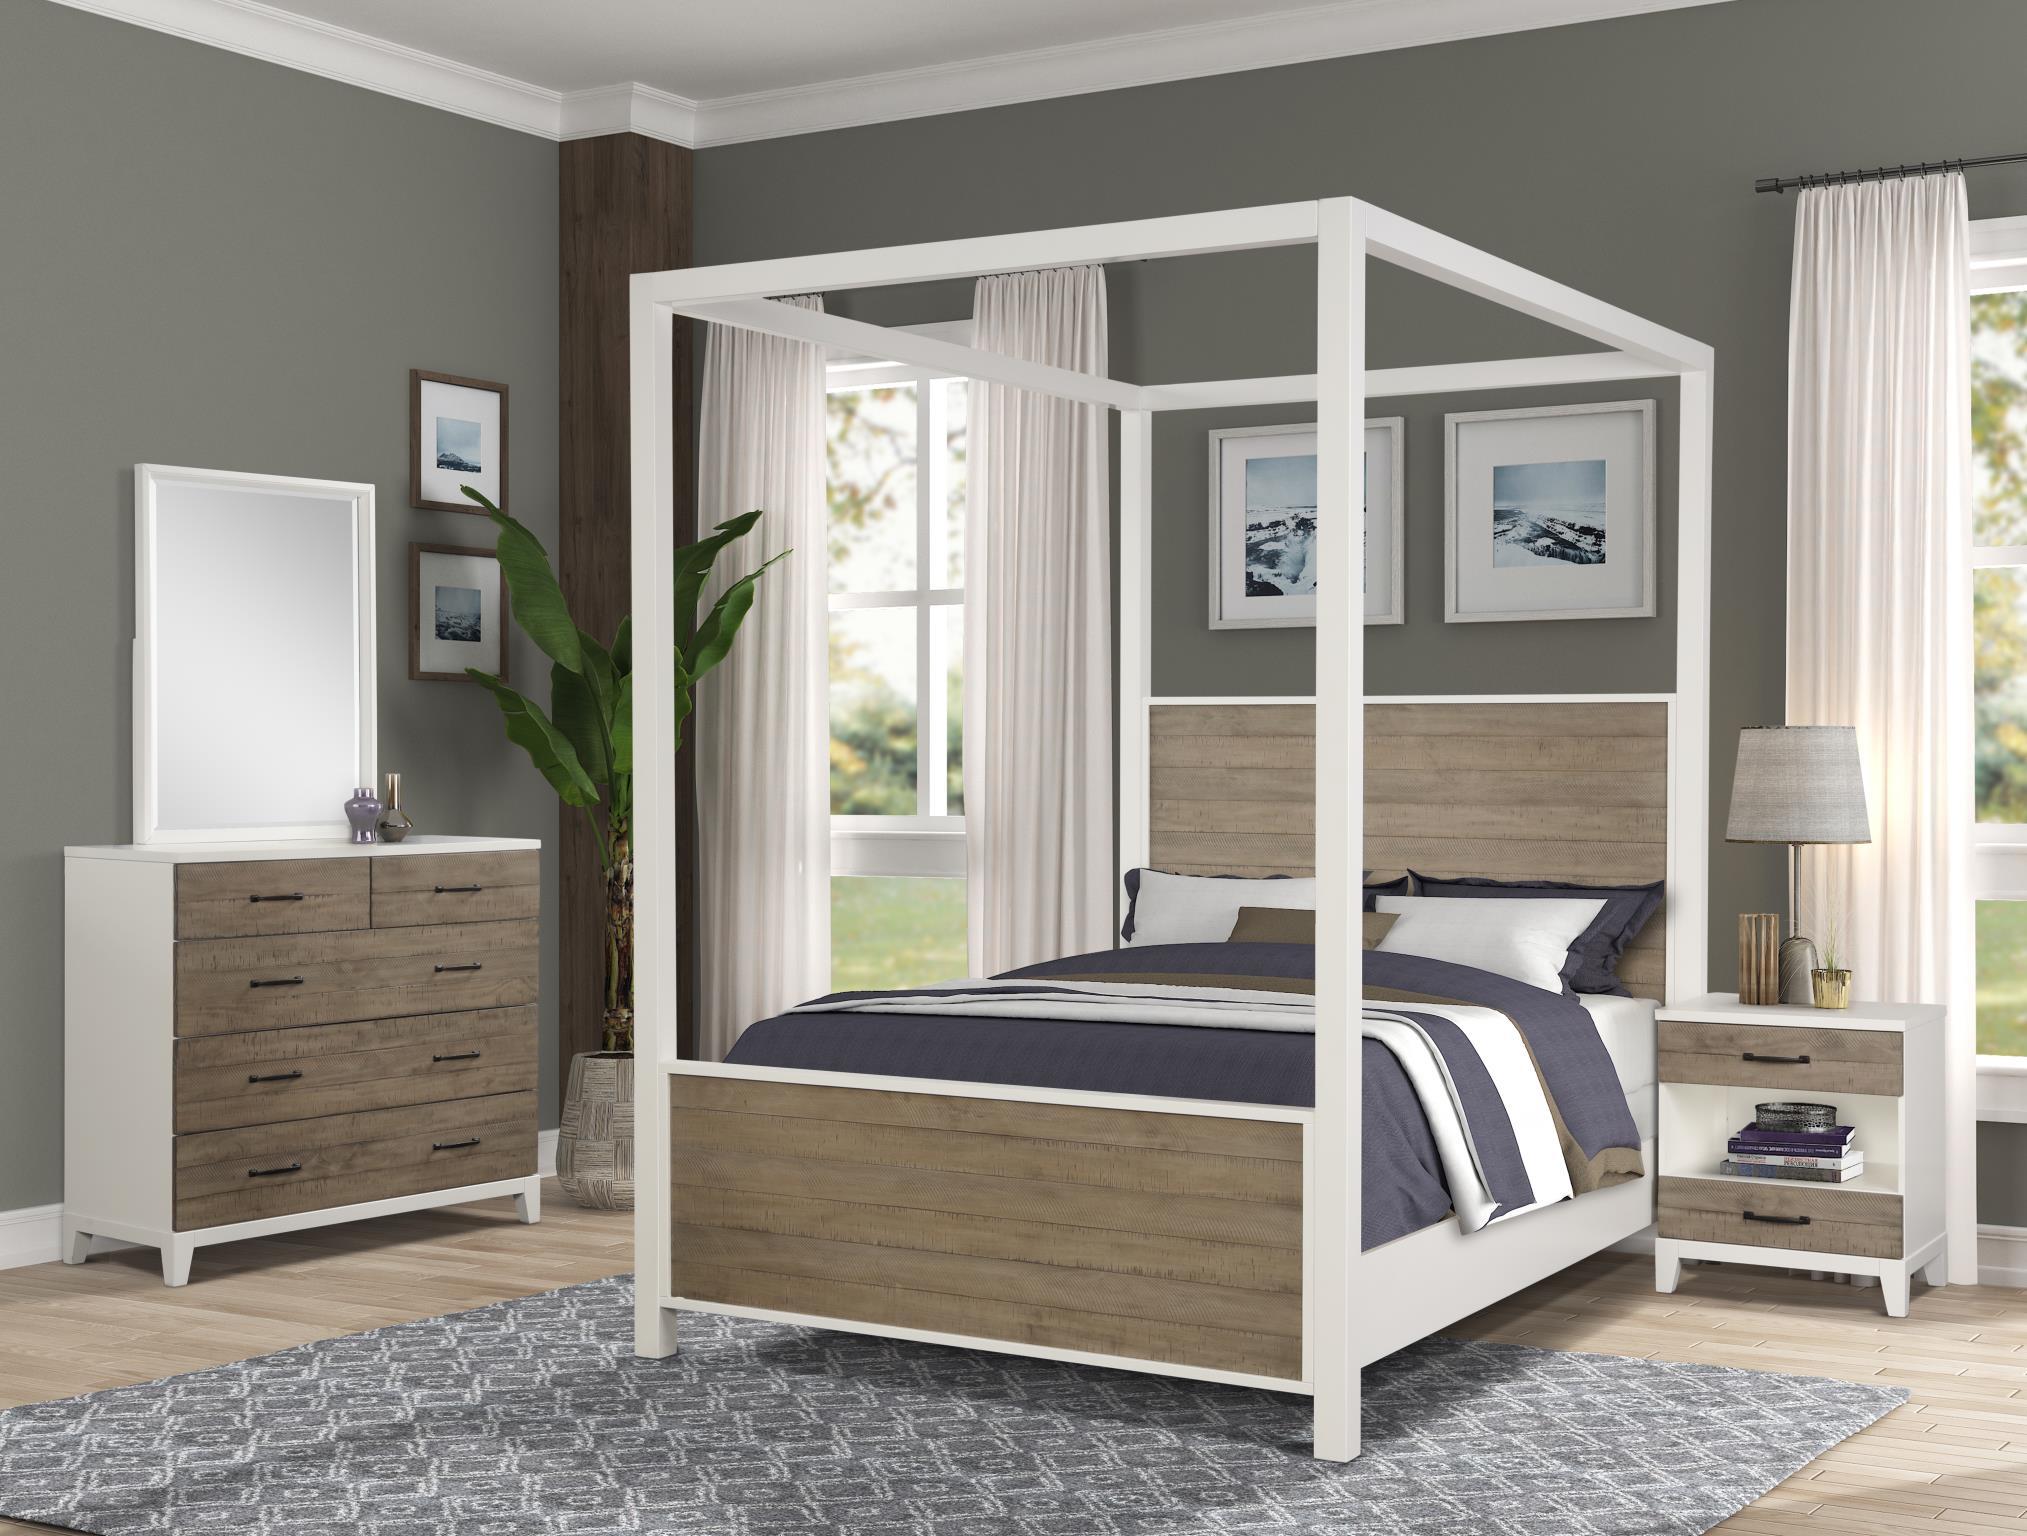 Contemporary, Transitional Bedroom Set DAYDREAMS 1288-113-Set-3 1288-113-2N-3PC in Brown Oak 